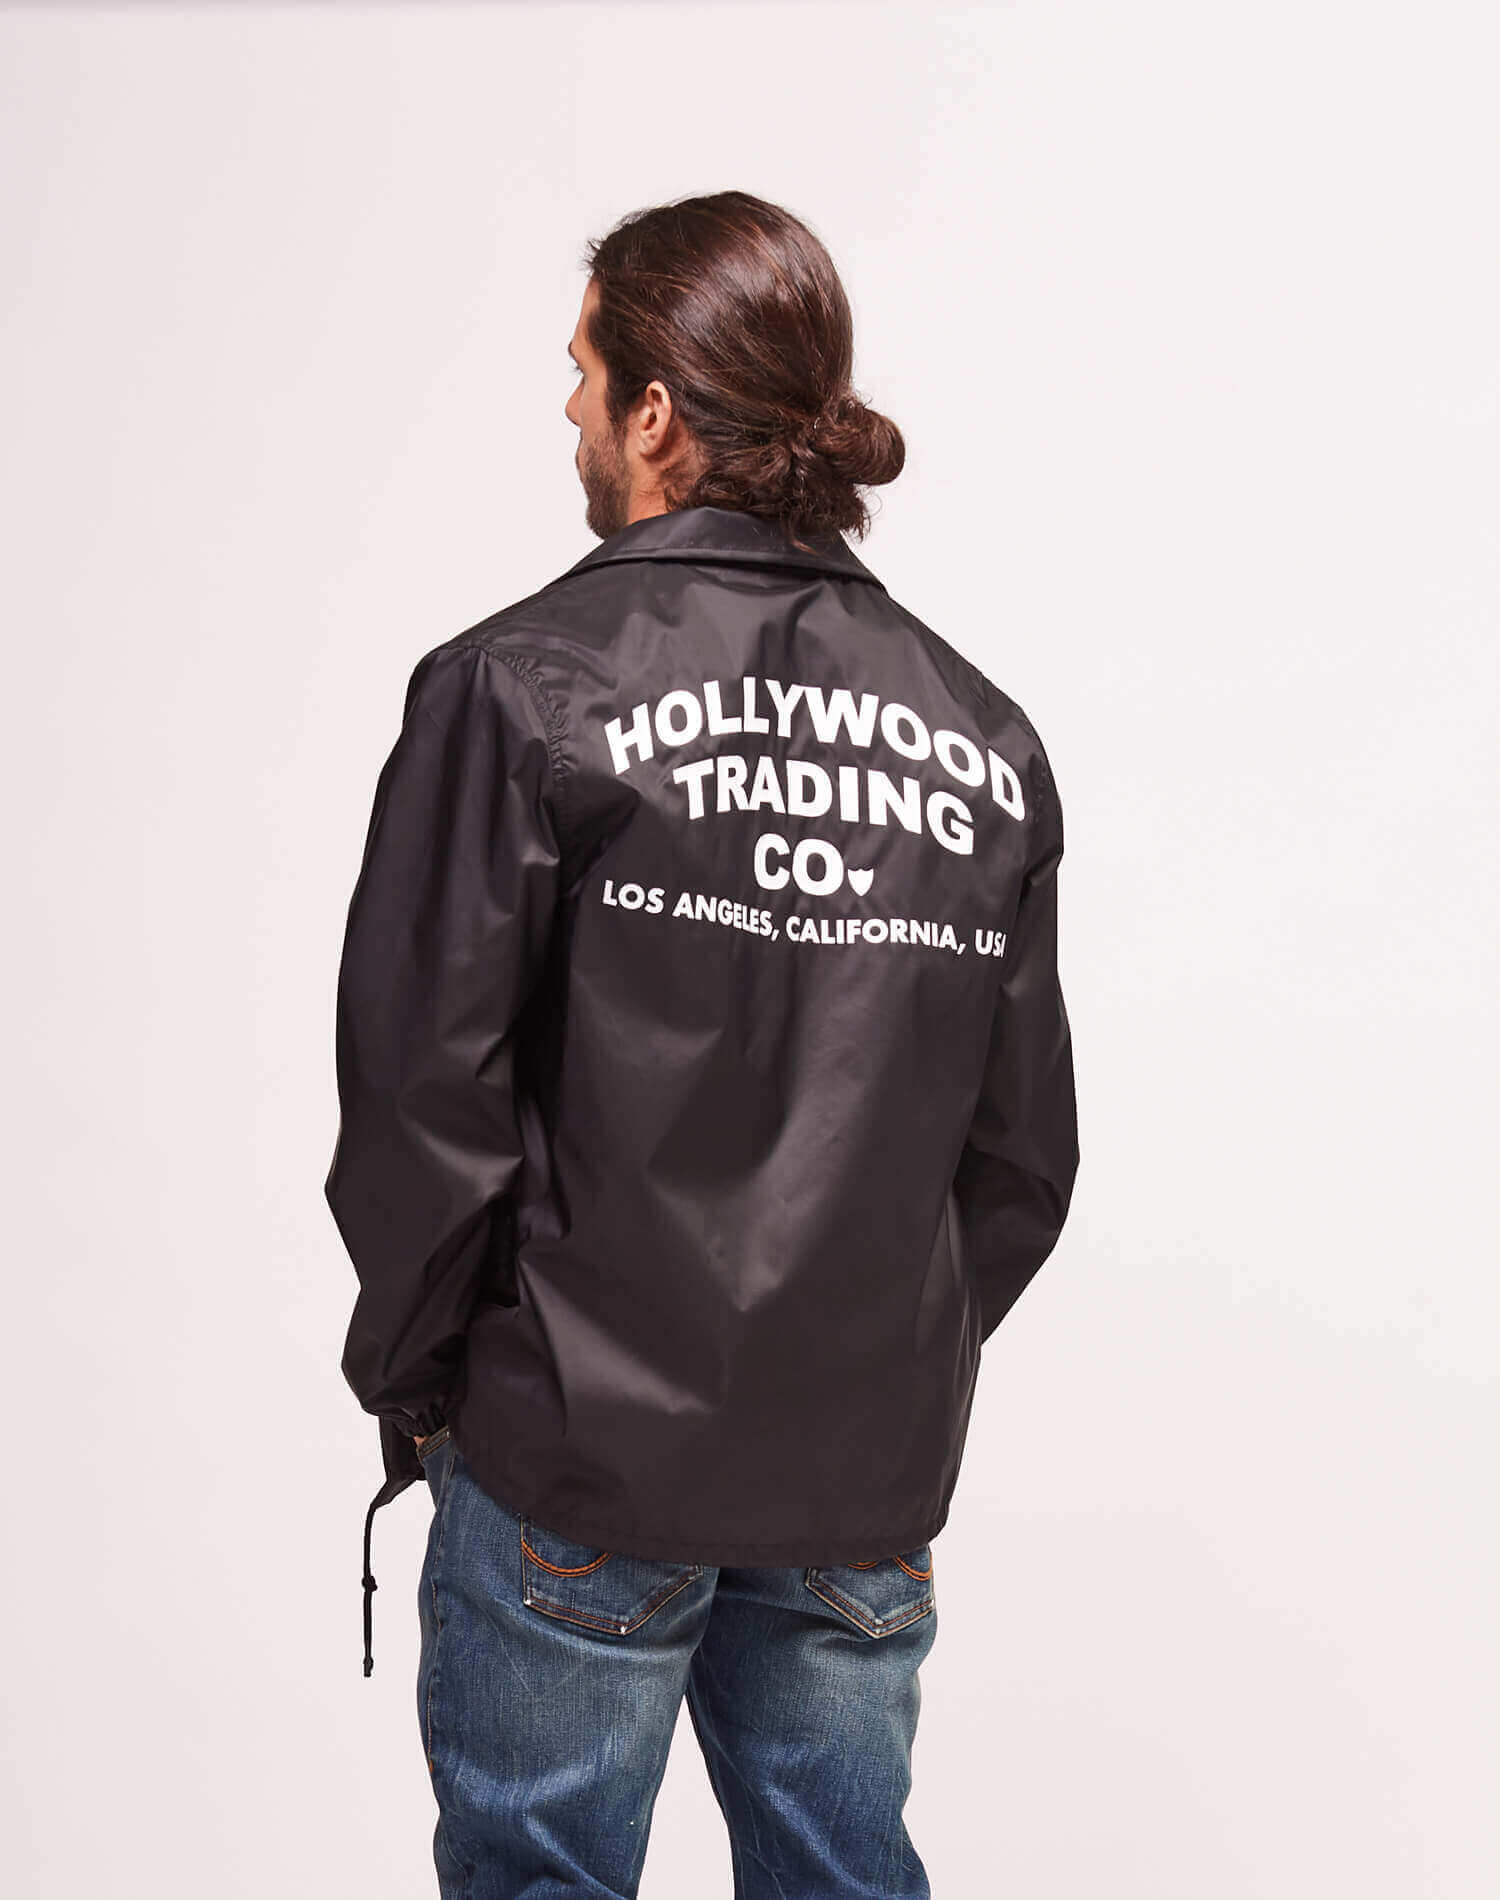 COACH JACKET Coach jacket with shirt style collar. Front snap button closure. Elastic cuffs. Drawstring at hem. Two side pockets. Front logo and 'Hollywood Trading Co.' on the back. 100% Polyester HTC LOS ANGELES